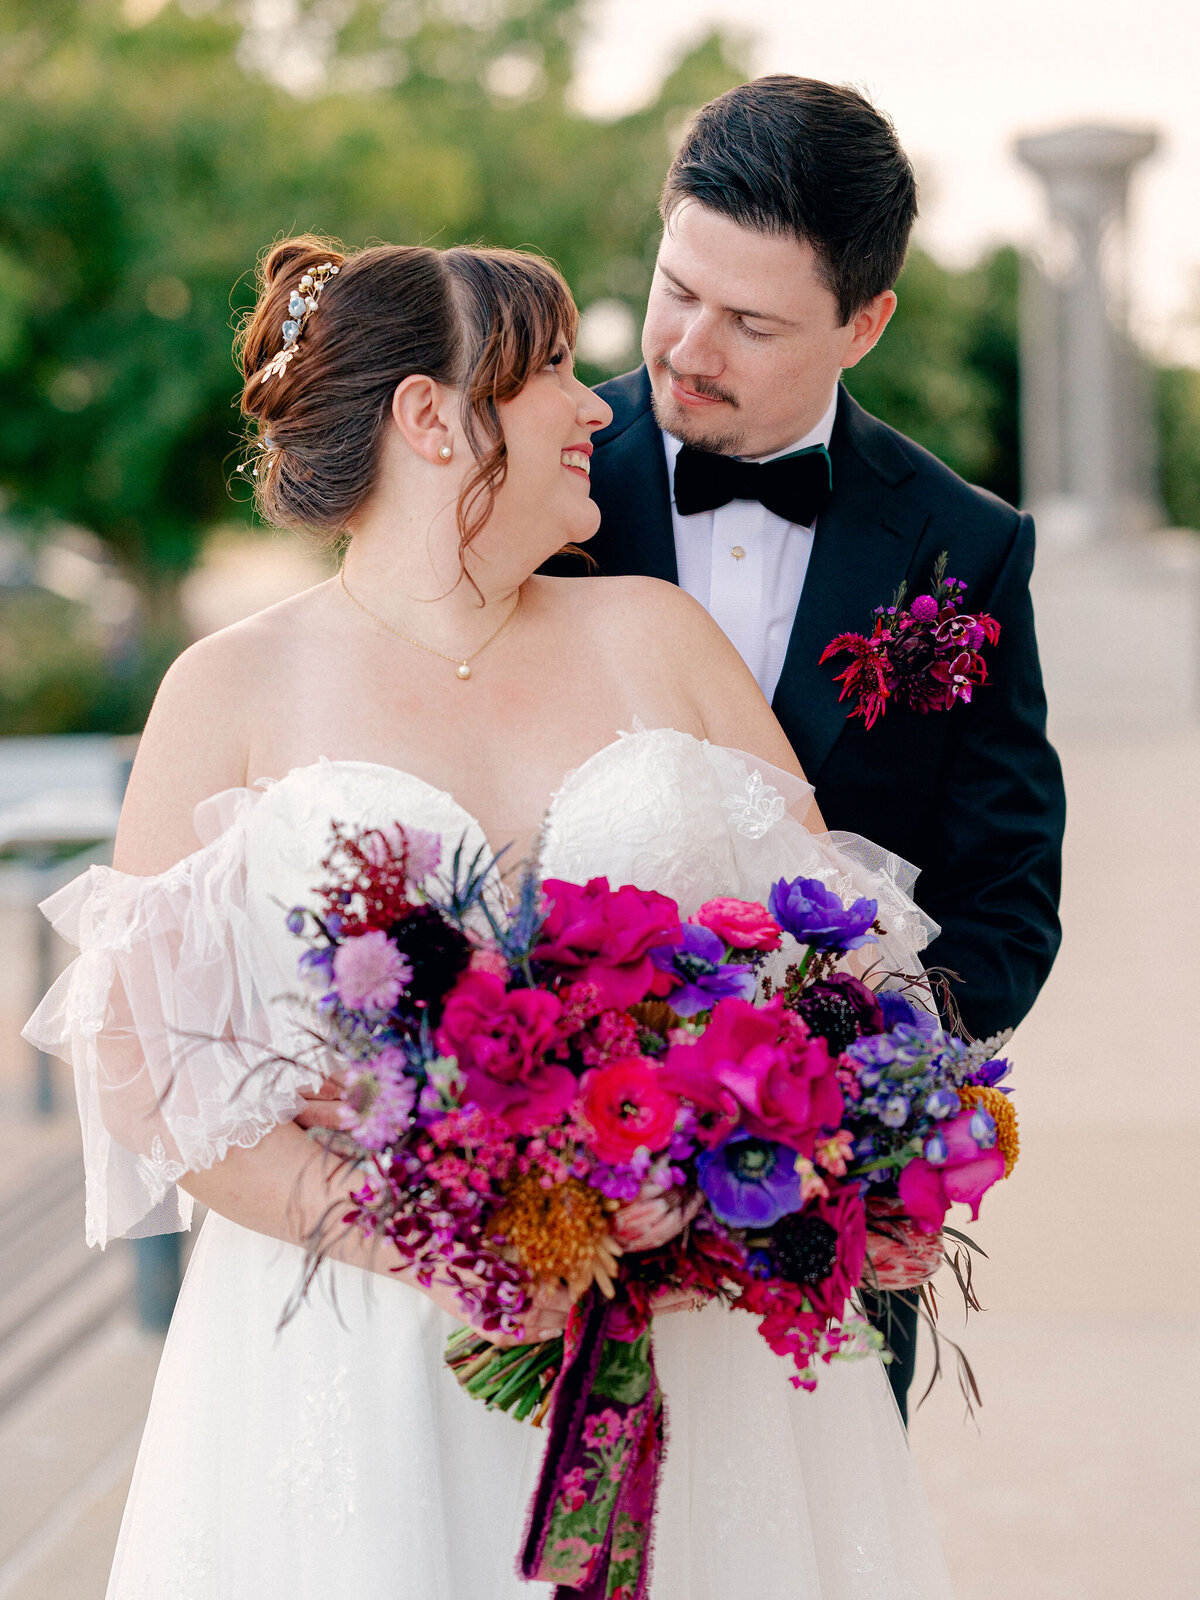 A groom hugs his bride from behind. They are looking at each other, and she is holding a large bouquet of jewel-toned flowers.